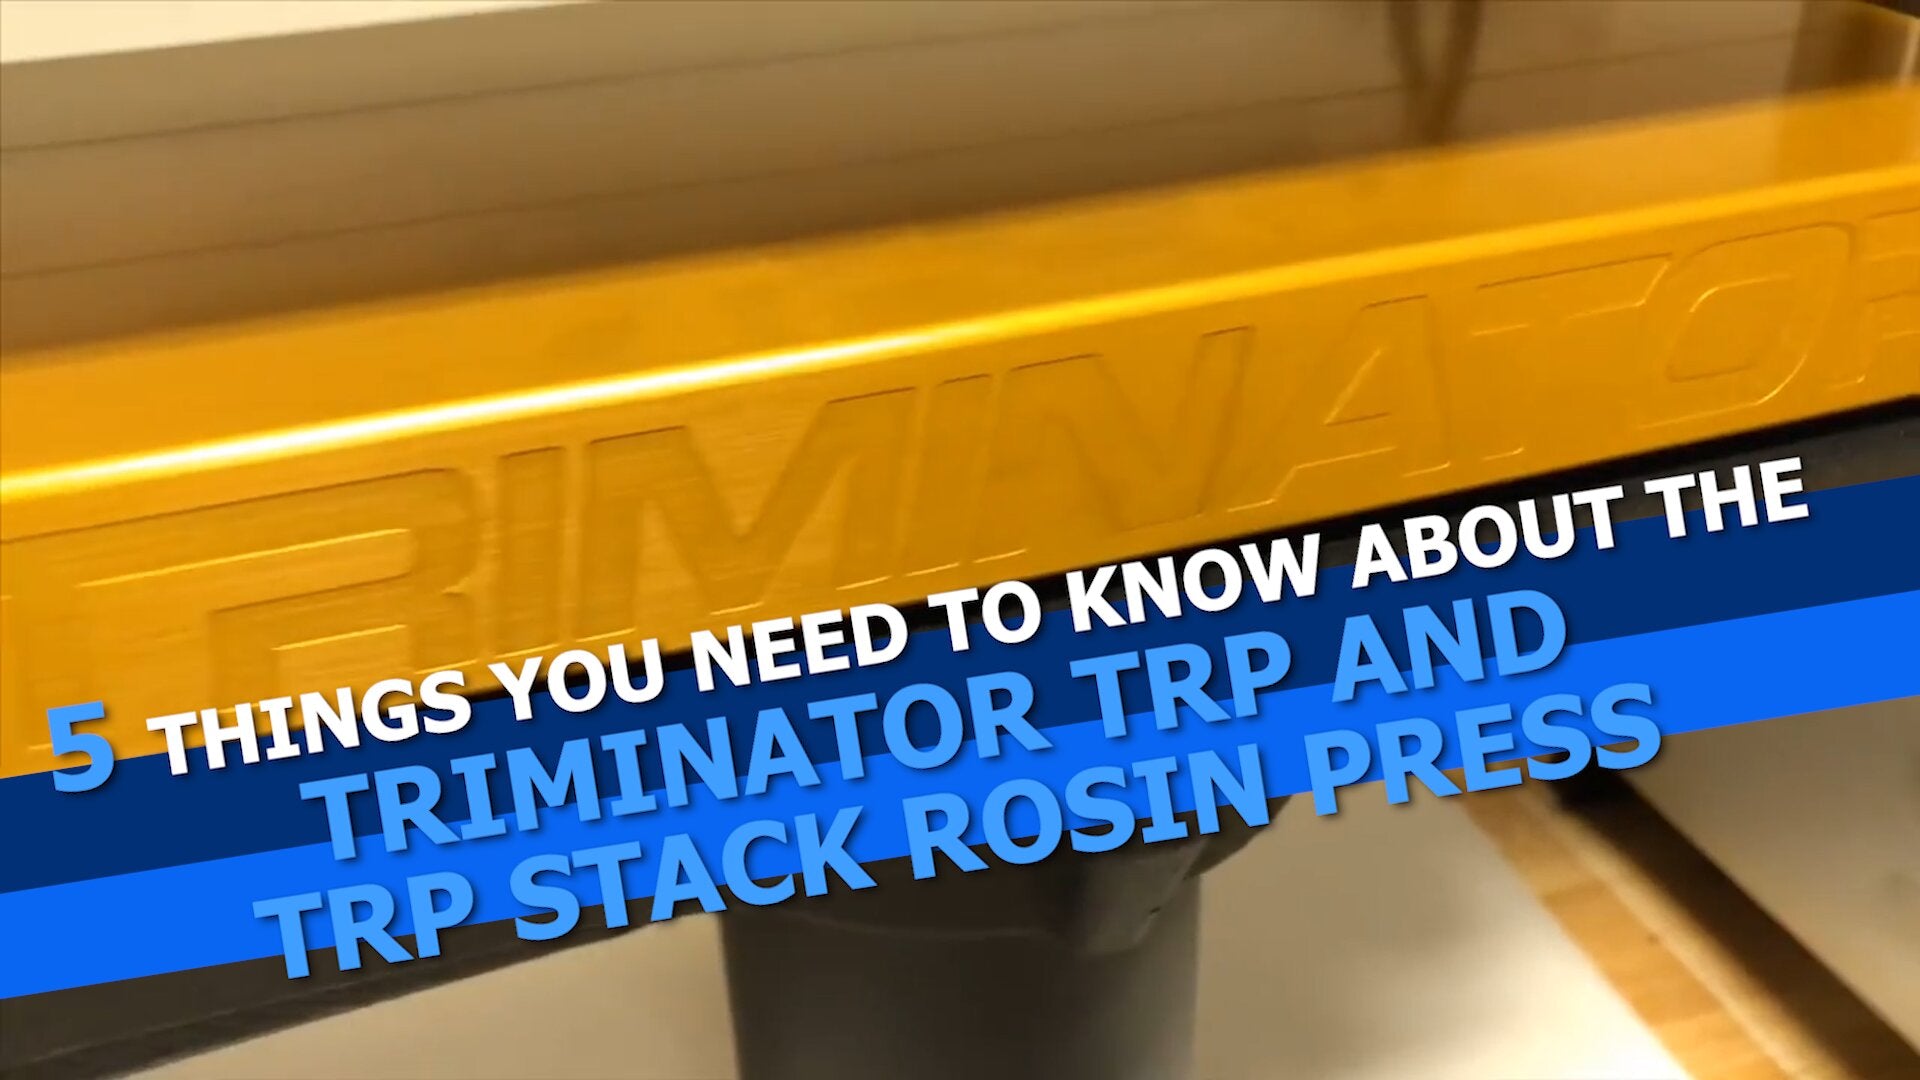 Triminator TRP and TRP Stack5 Things You Need to Know About the Triminator TRP and TRP Stack